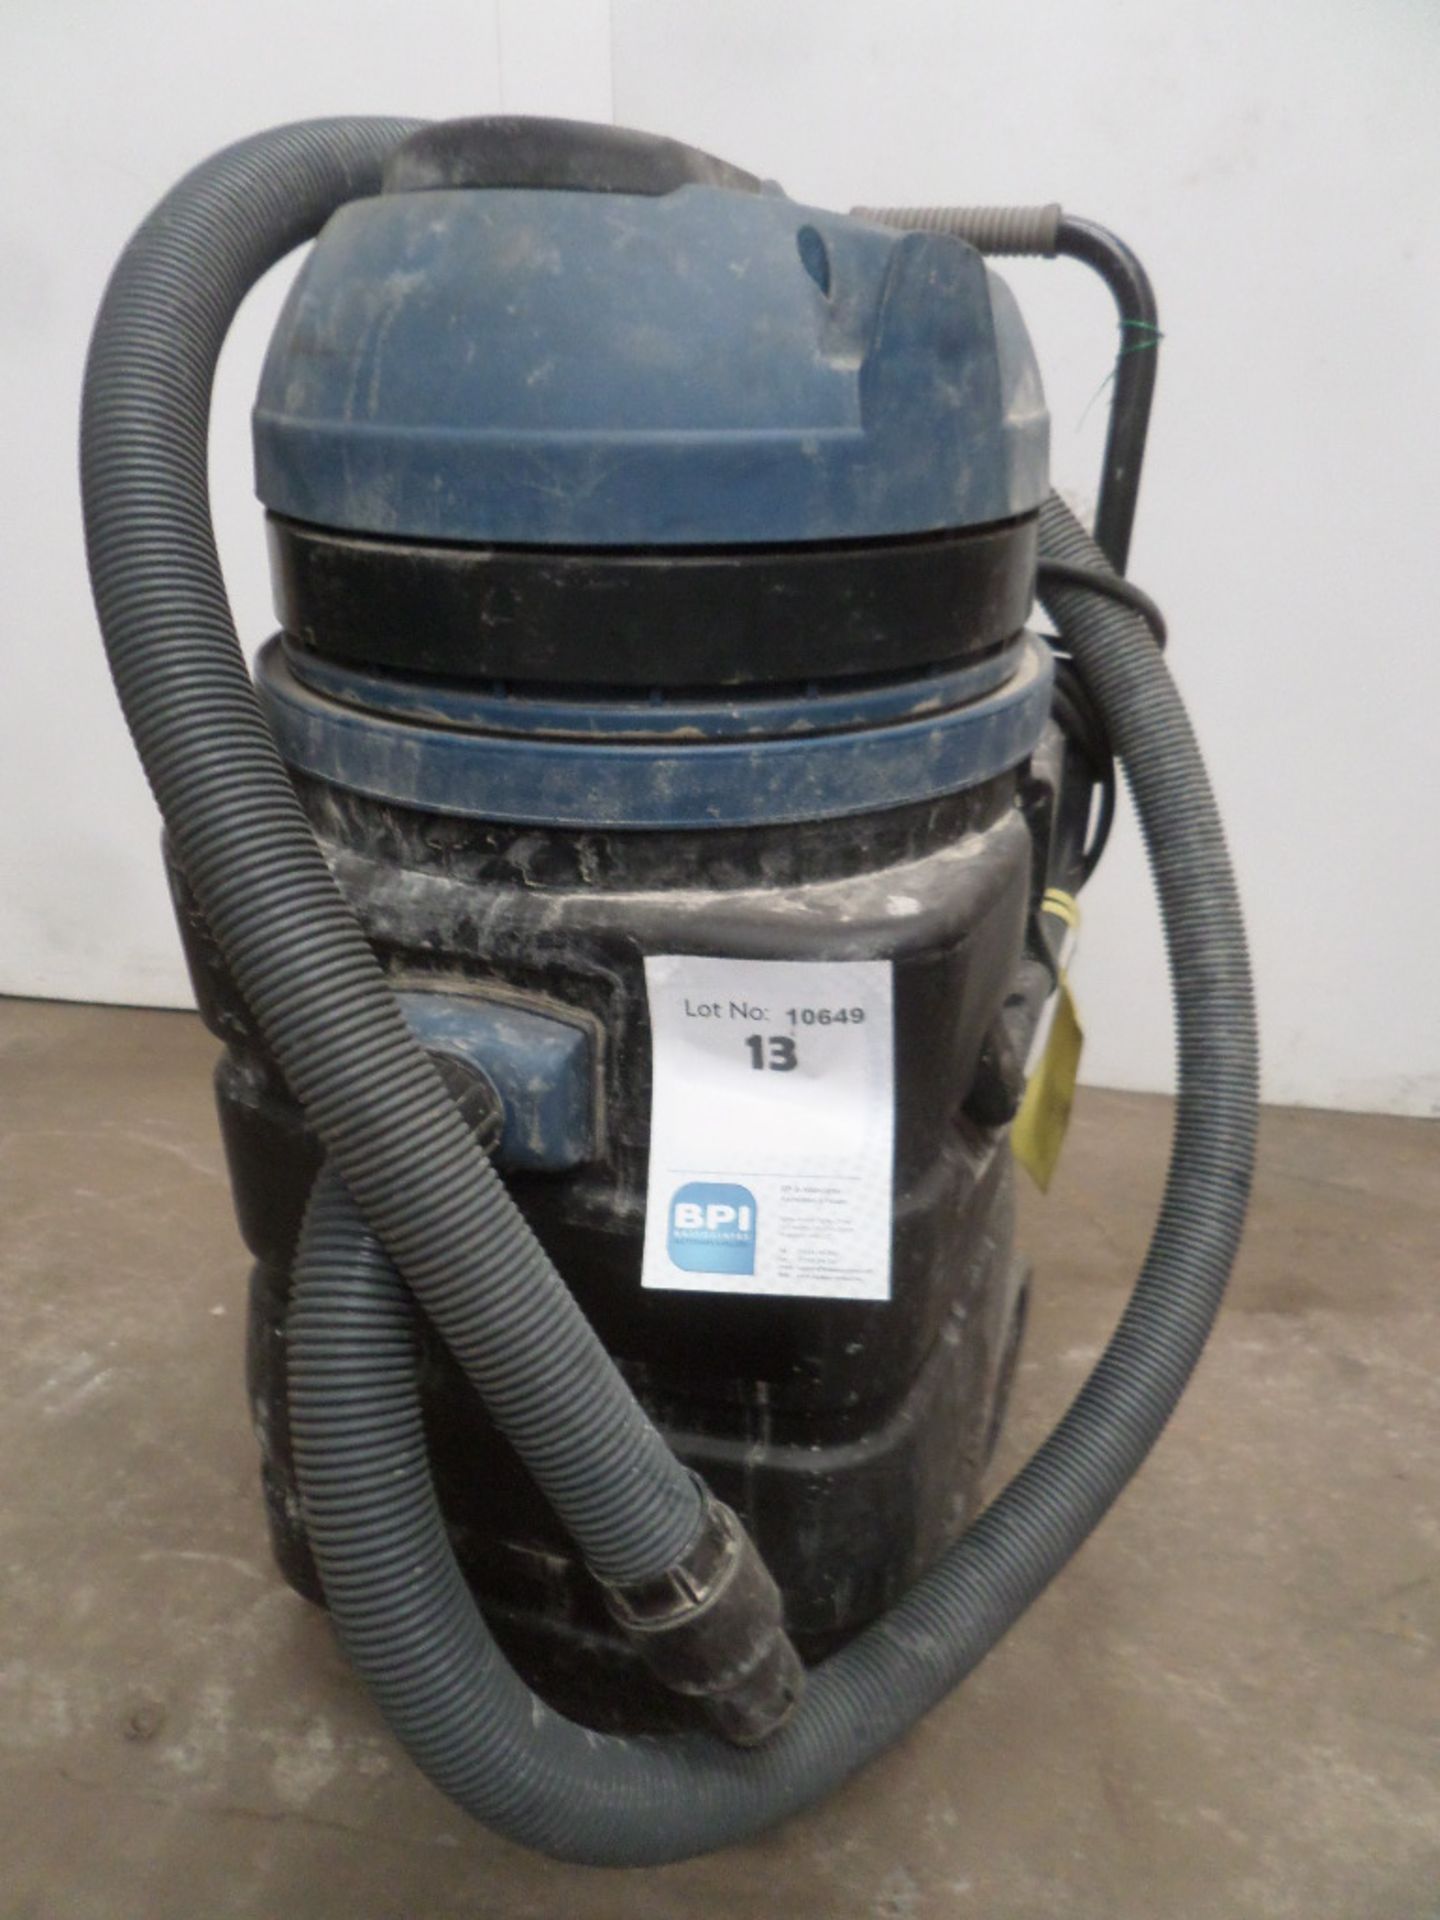 SOTECO VAGAS 429 {016123} INDUSTRIAL WET and DRY VACUUM 110v 32amp connection - tested and is workin